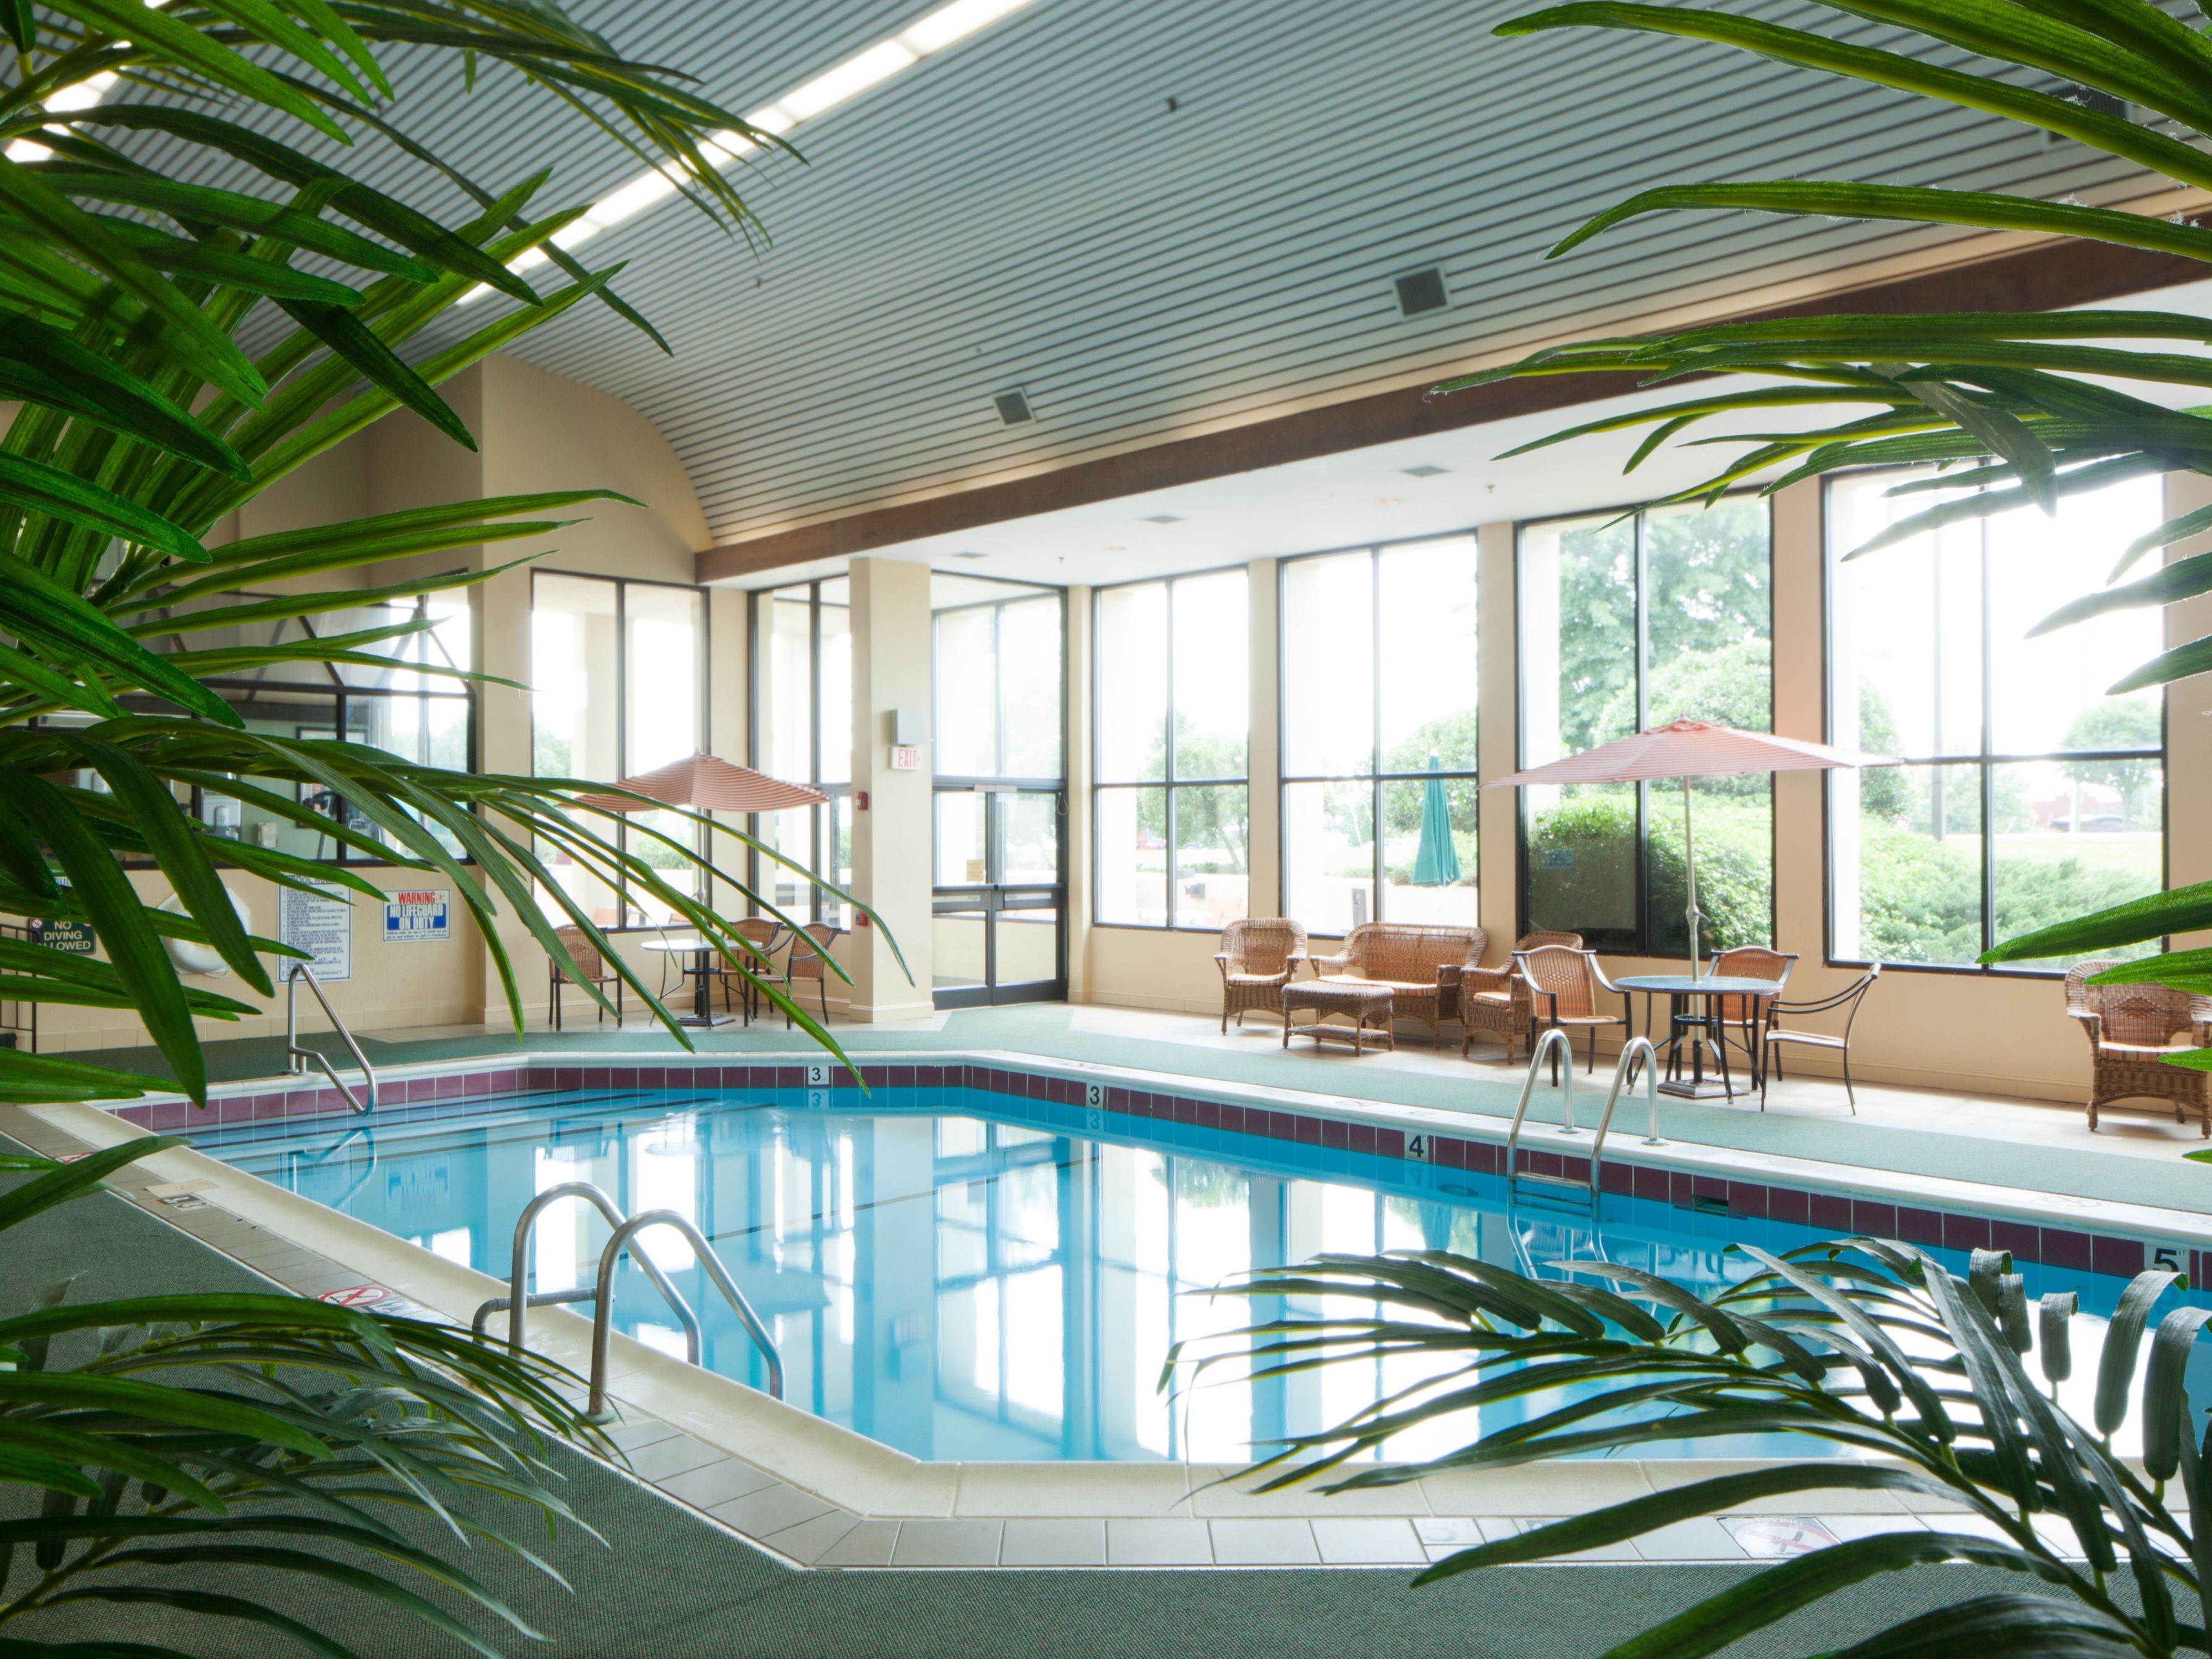 You and your family can relax in our heated indoor saltwater pool.